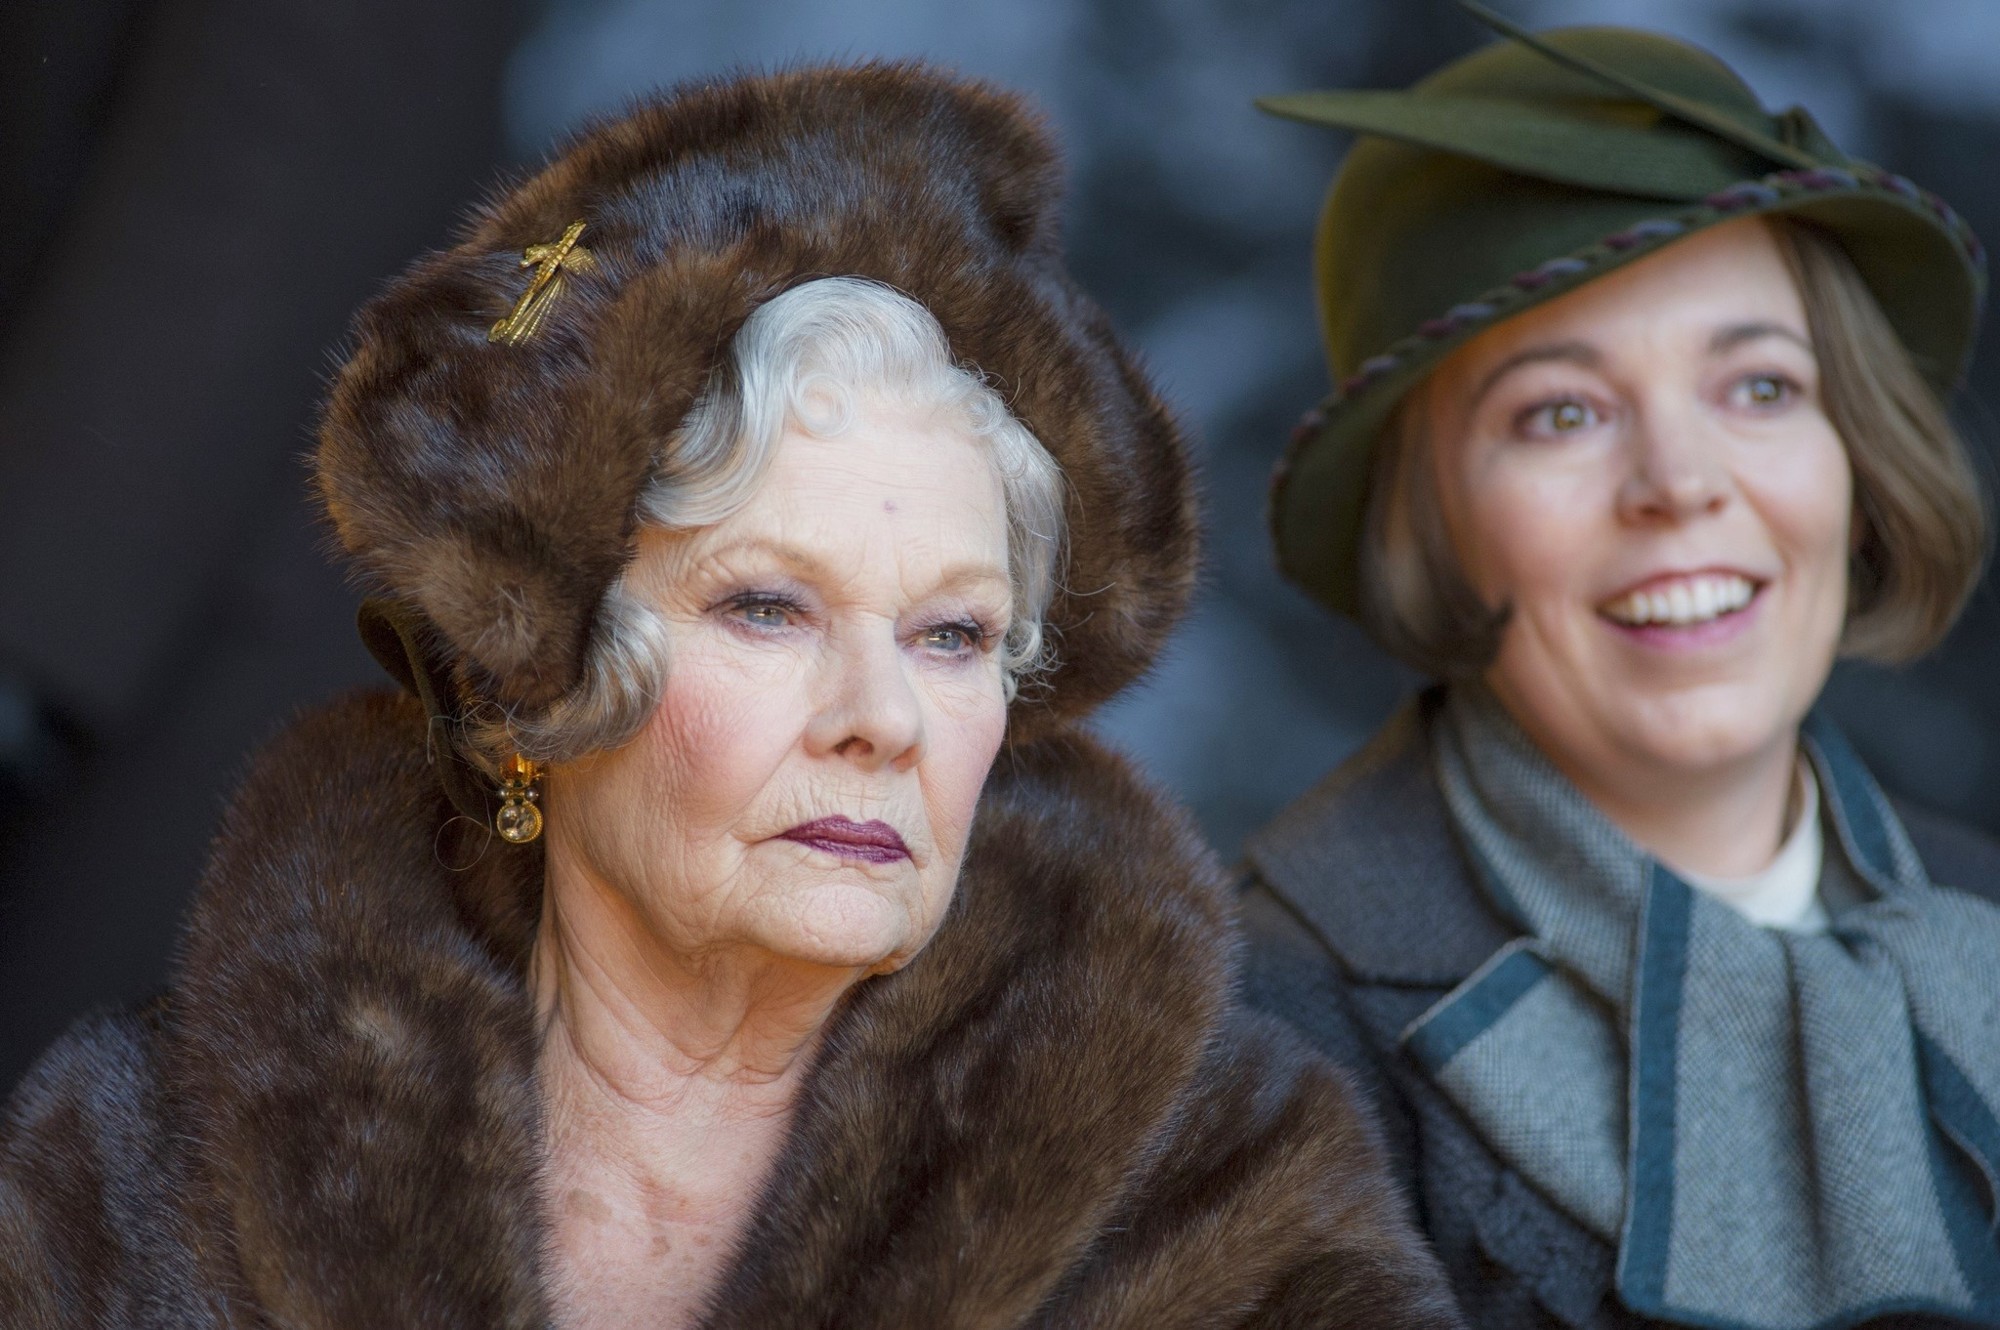 Judi Dench stars as Princess Dragomiroff and Olivia Colman stars as Hildegarde Schmidt in 20th Century Fox's Murder on the Orient Express (2017)